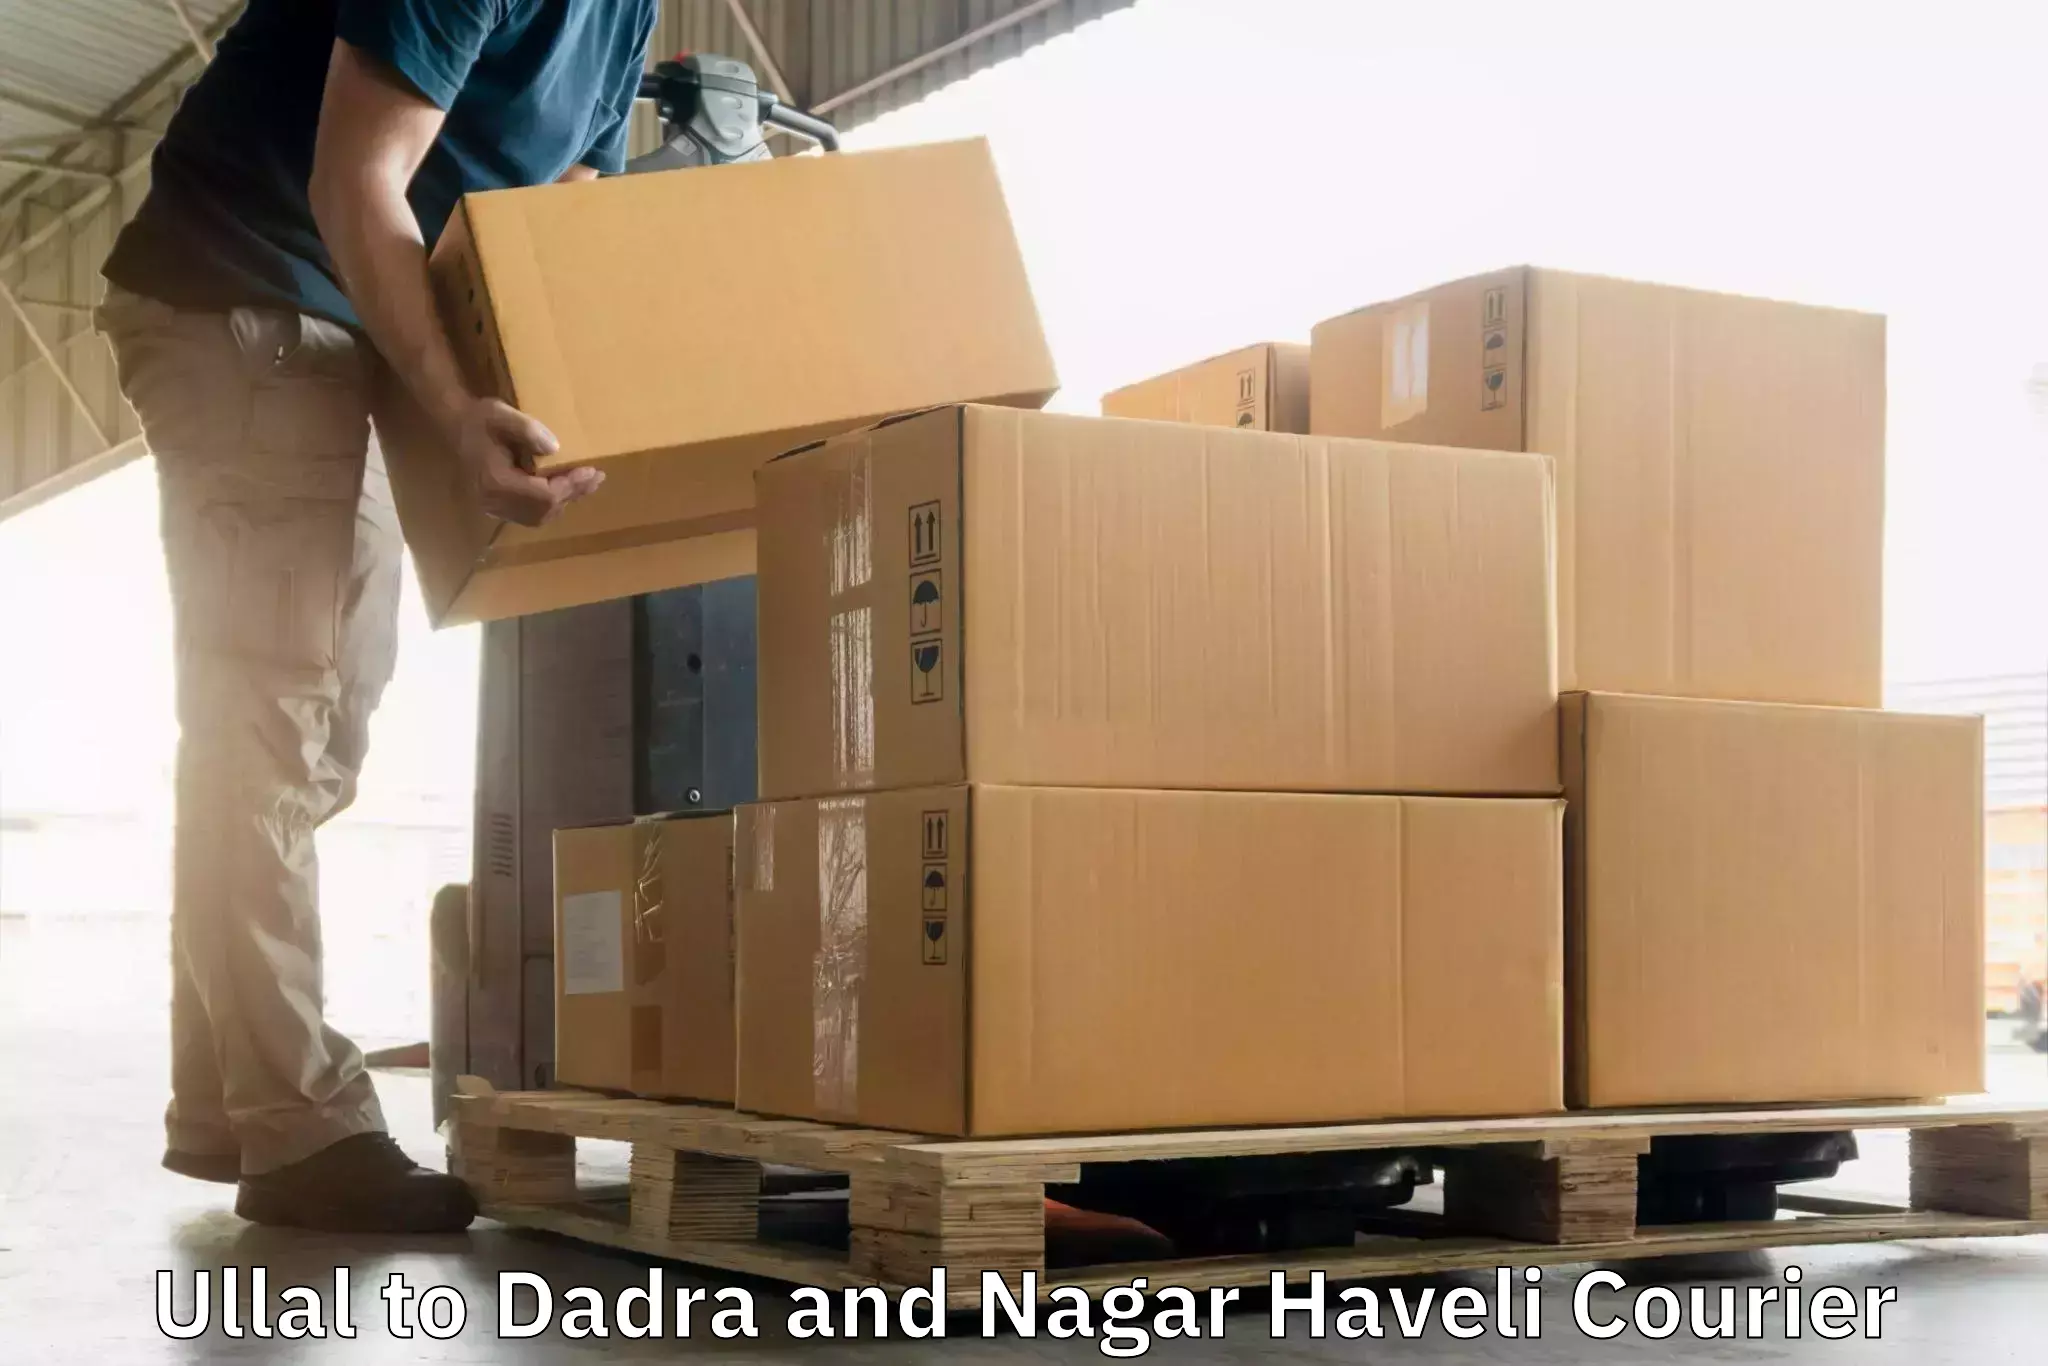 Large-scale shipping solutions Ullal to Dadra and Nagar Haveli